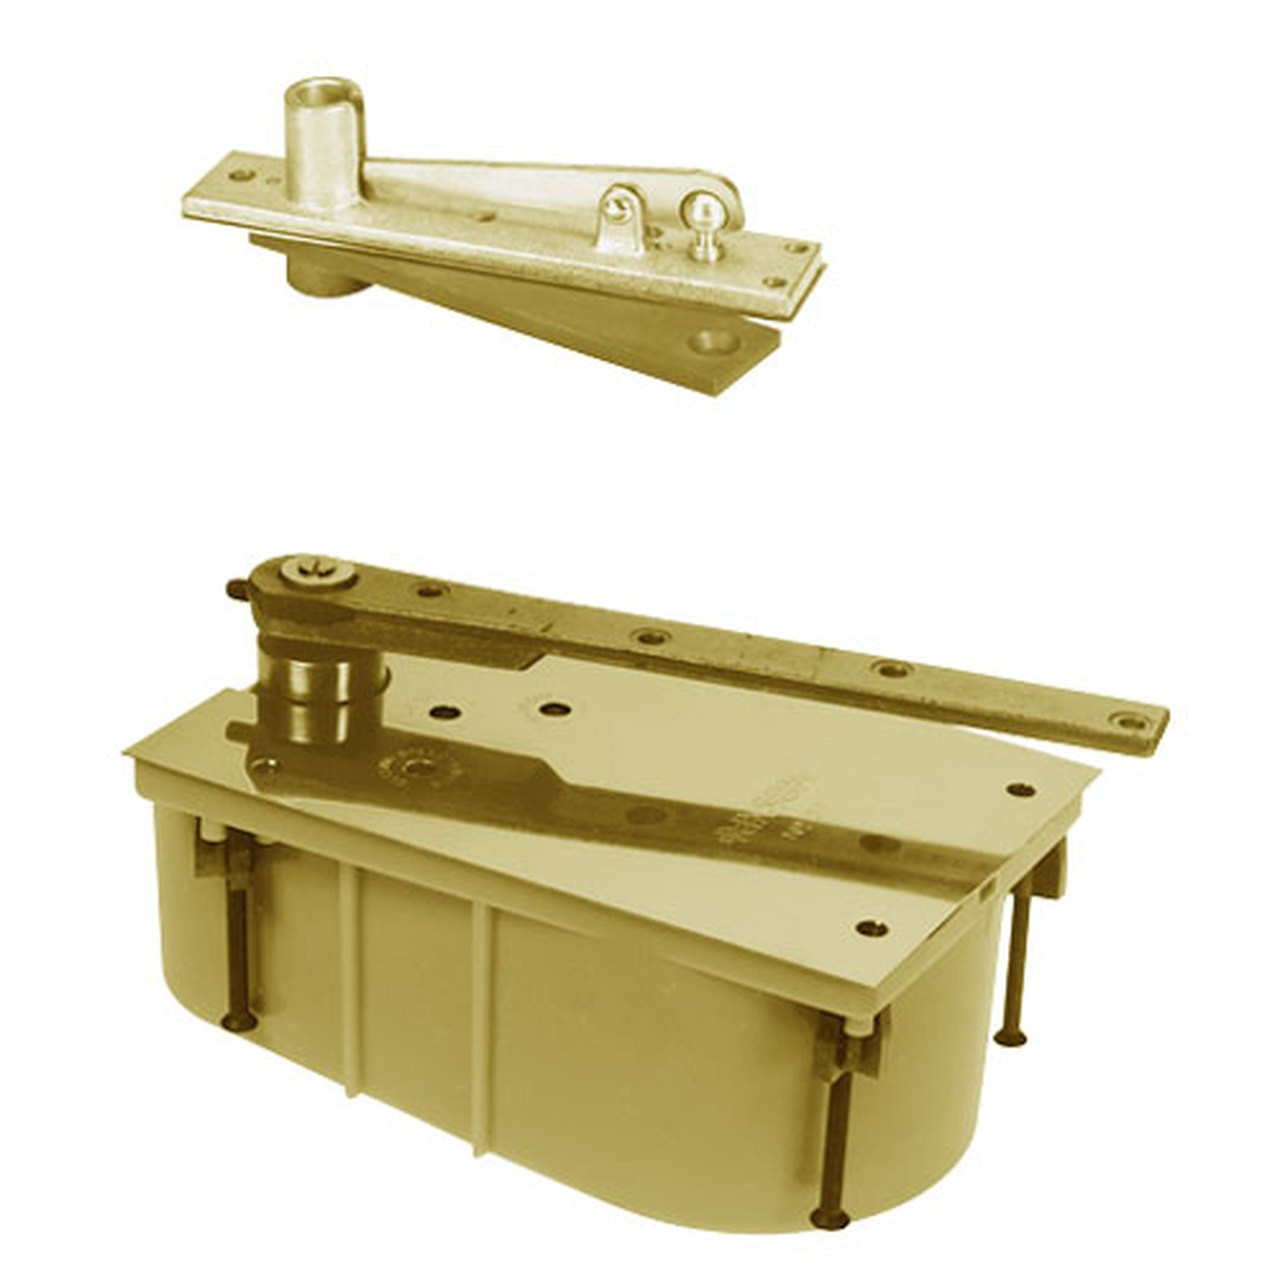 28-105S-554-LCC-LH-606 Rixson 28 Series Heavy Duty Single Acting Center Hung Floor Closer with Concealed Arm in Satin Brass Finish